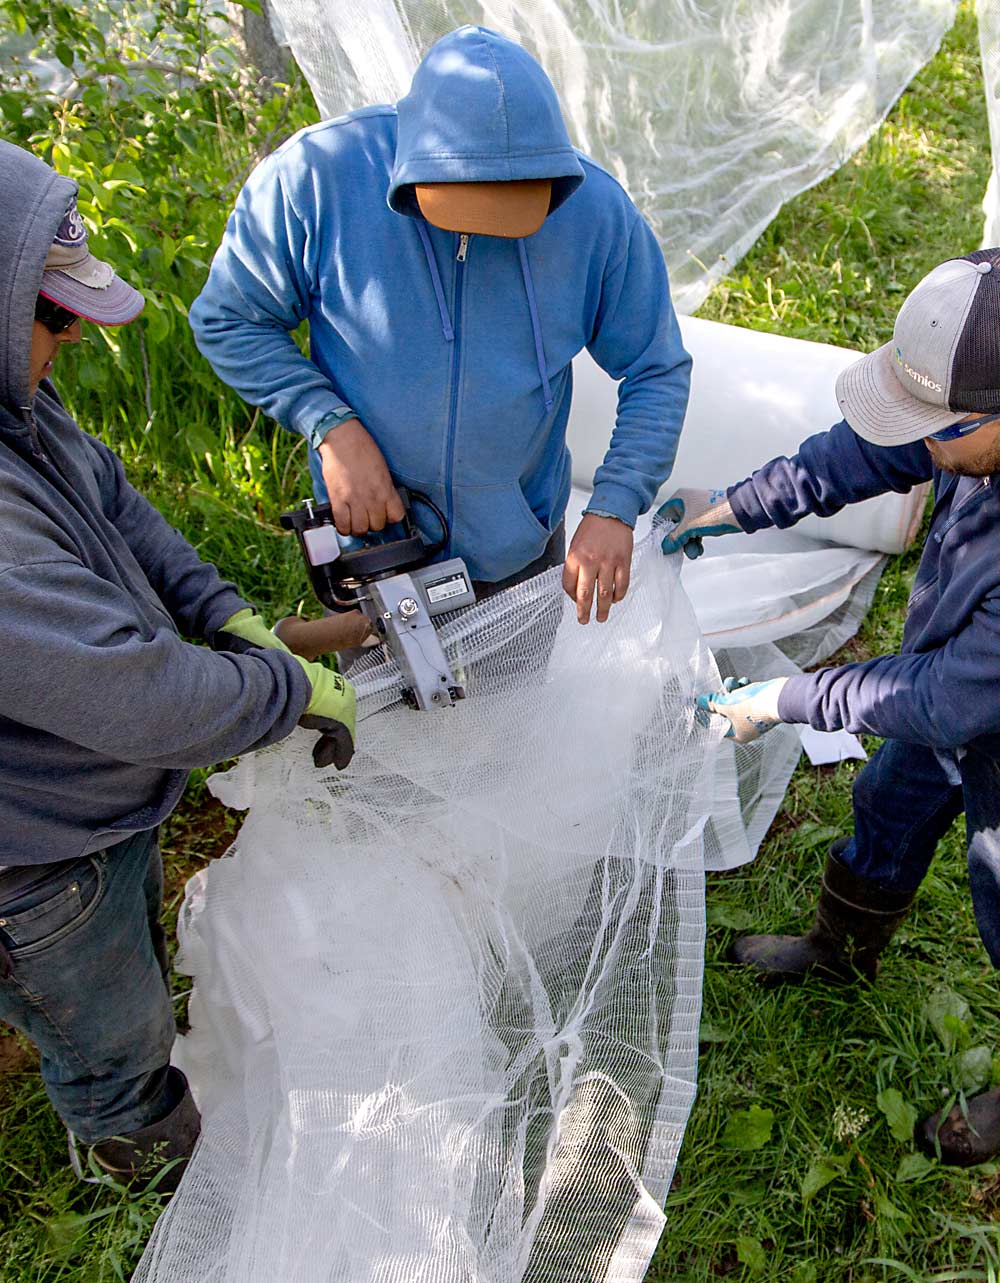 Borja, center, uses a battery-powered sewing machine to join the ends of two sections of fabric, while Carlos Morales, left, and Enrique Sandoval stretch the seam flat.  (Ross Courtney/Good Fruit Grower)